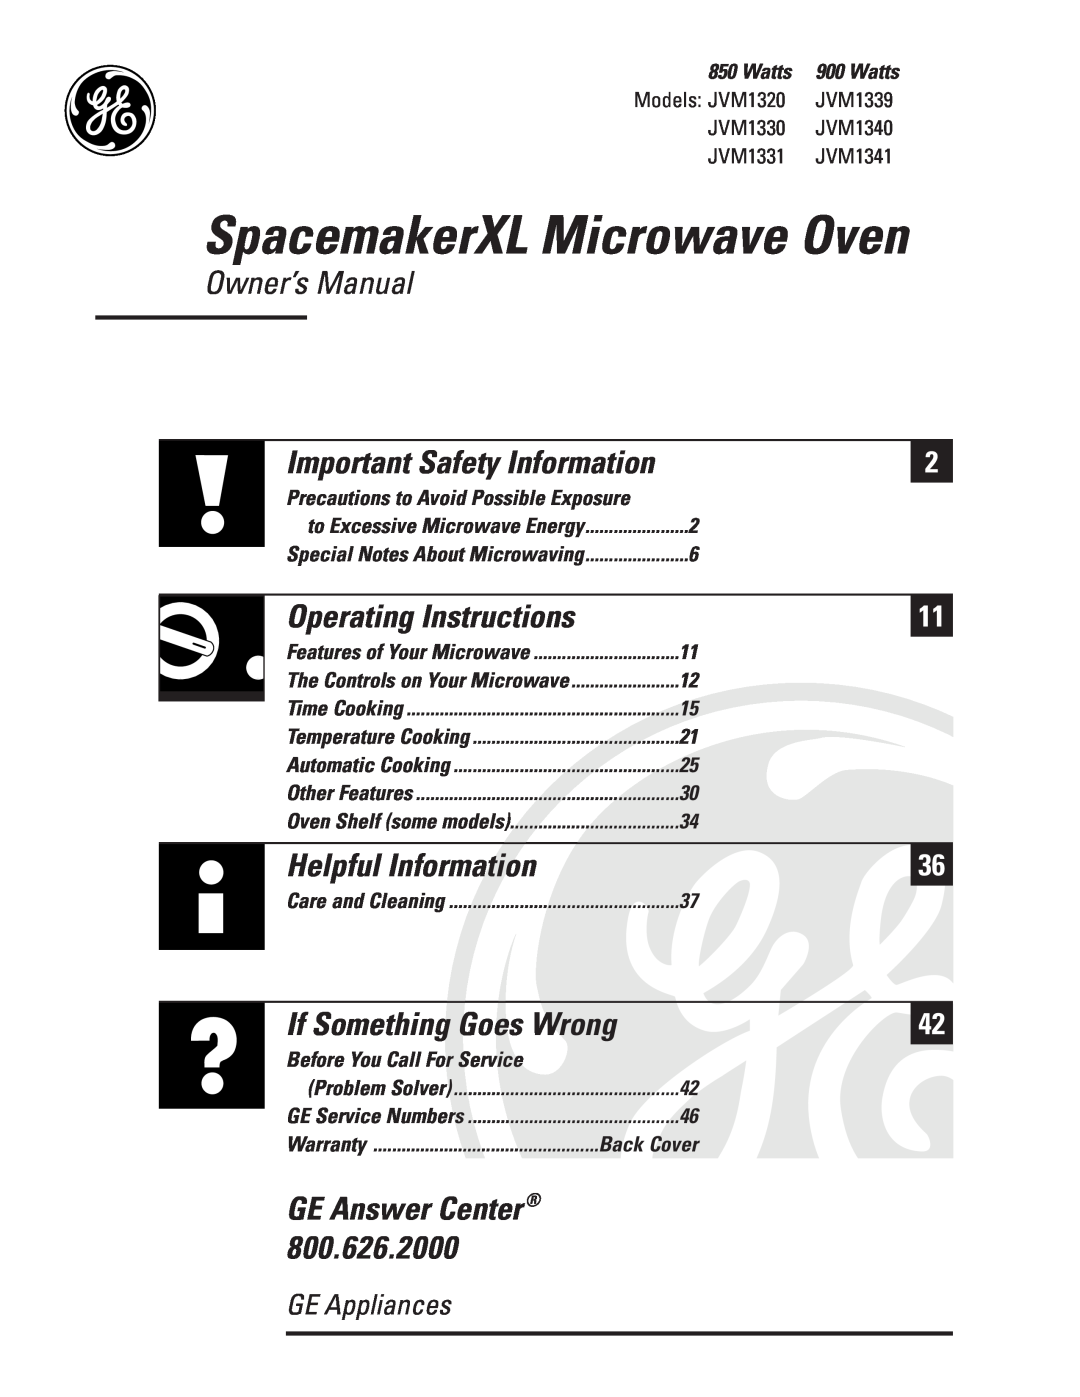 GE JVM1320 warranty Important Safety Information, GE Answer Center, SpacemakerXL Microwave Oven, Operating Instructions 